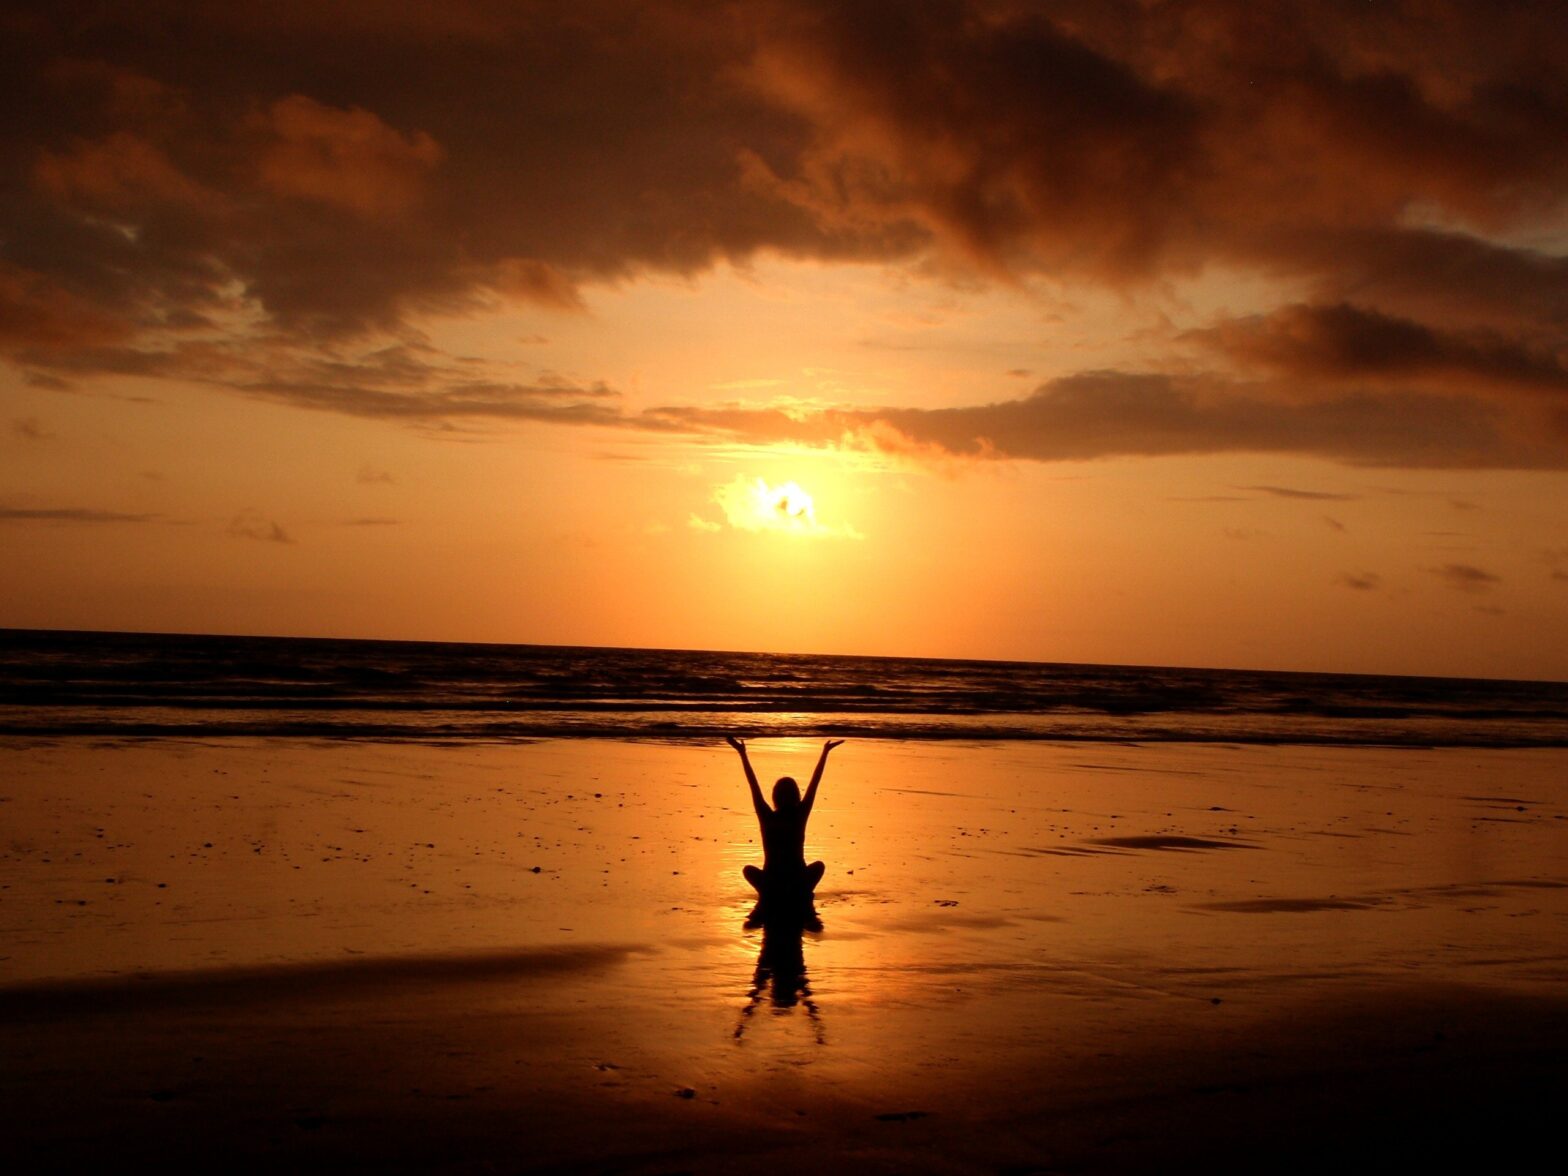 A silhouette of a person sitting on the sunset beach, attaining divine consciousness.